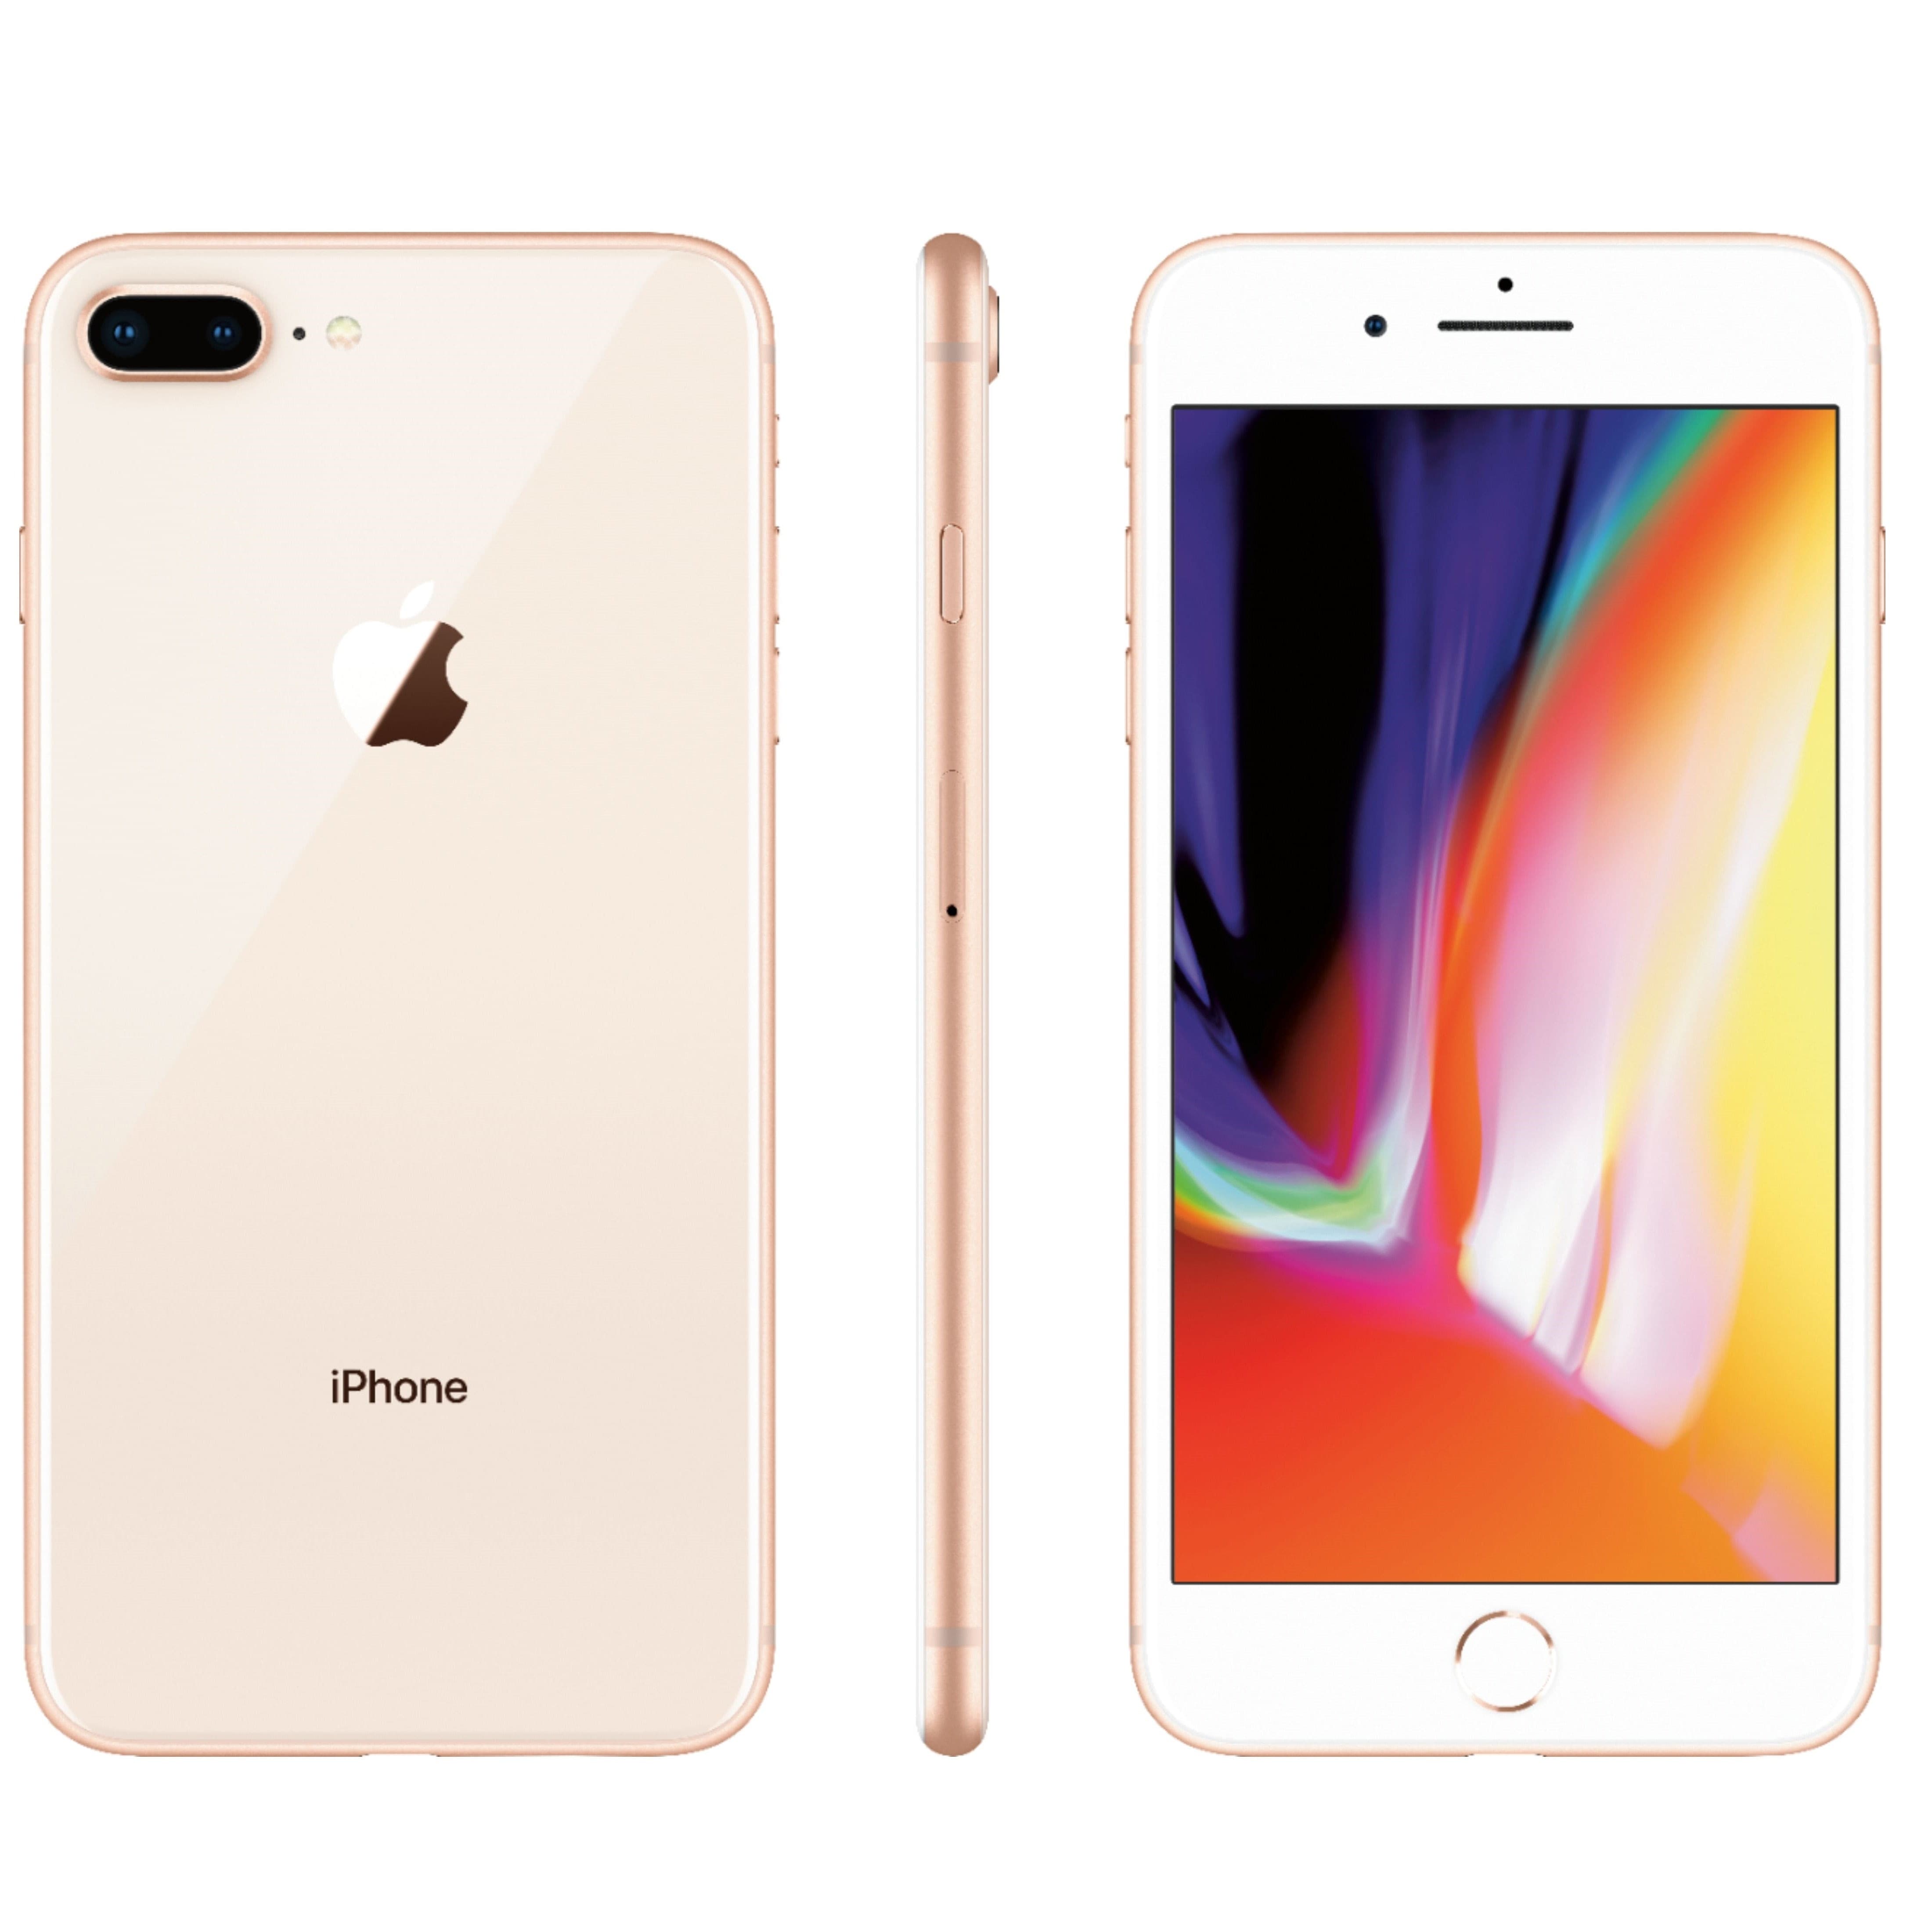 iPhone 8/8 Plus 4.7/5.5" Touch ID IOS Smartphone Brand New Condition.